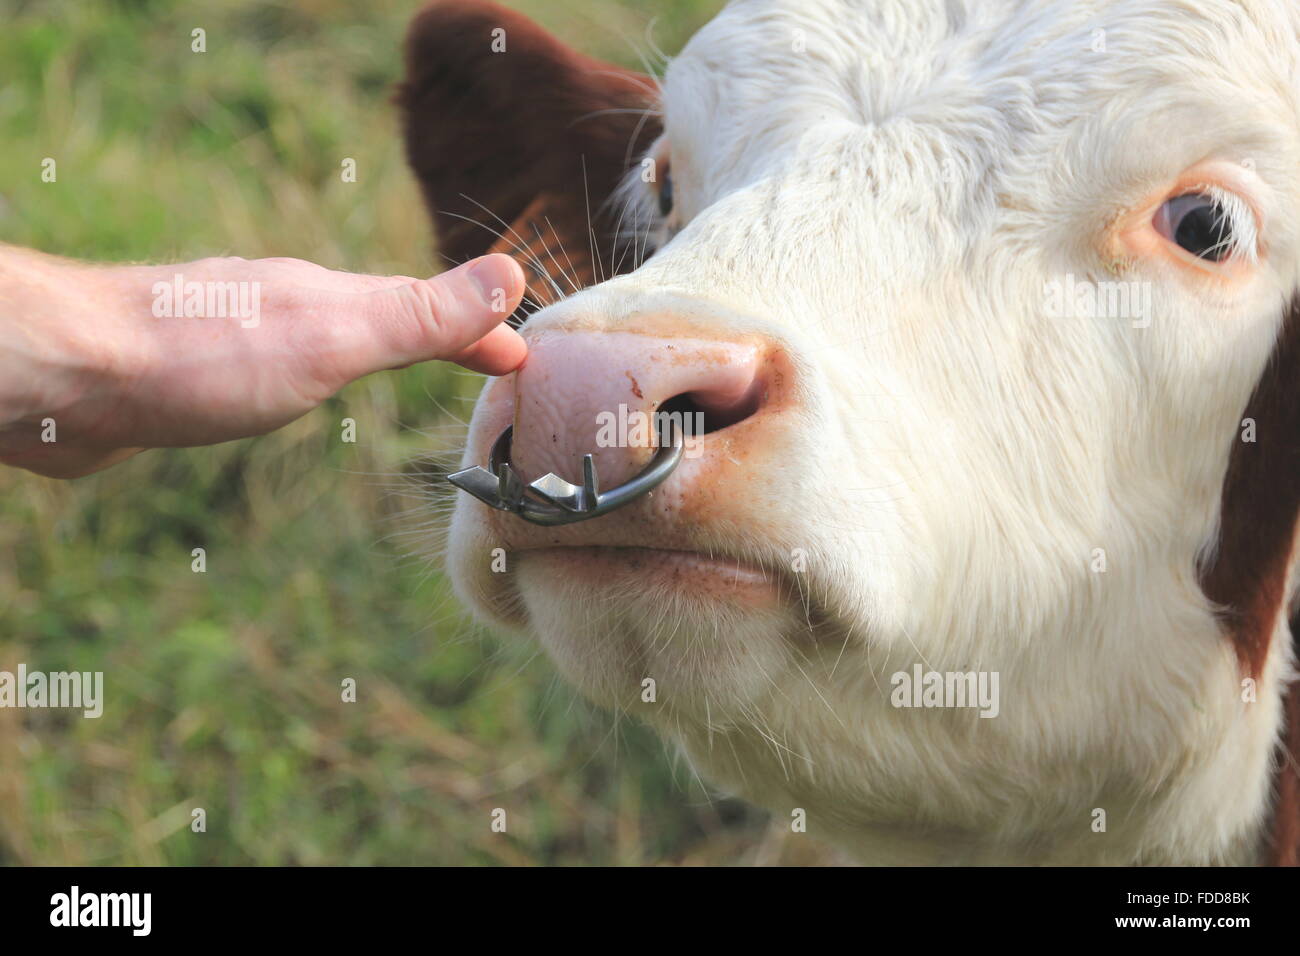 man is touching the nose of a cow Stock Photo